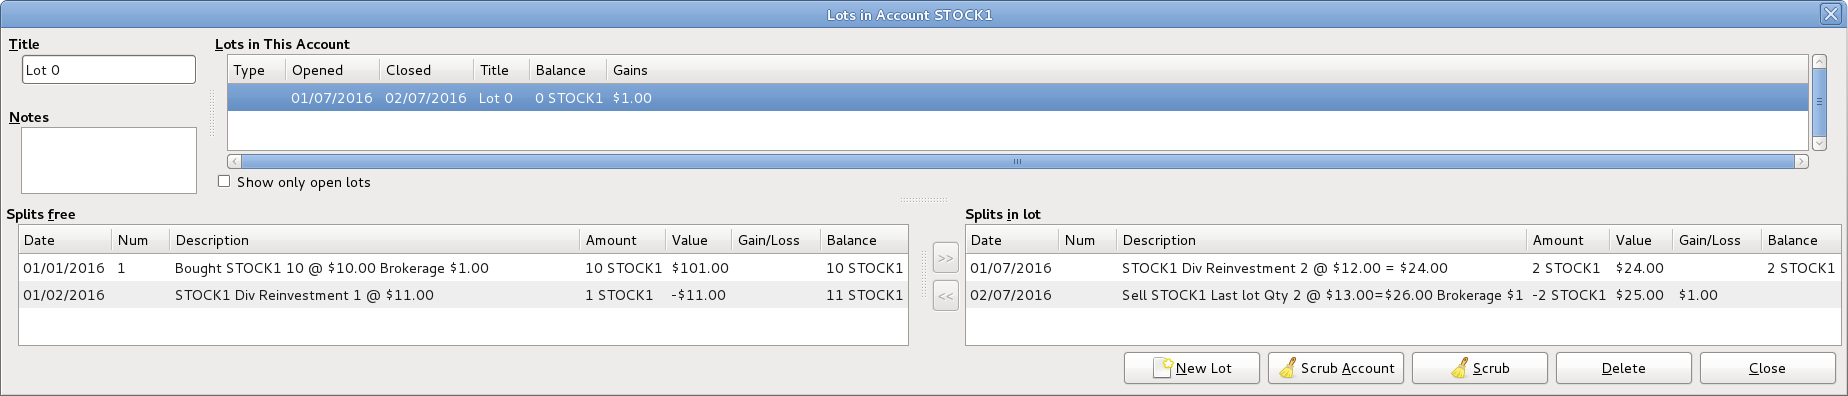 Selling Shares - Capital Gains - Lots in Account window